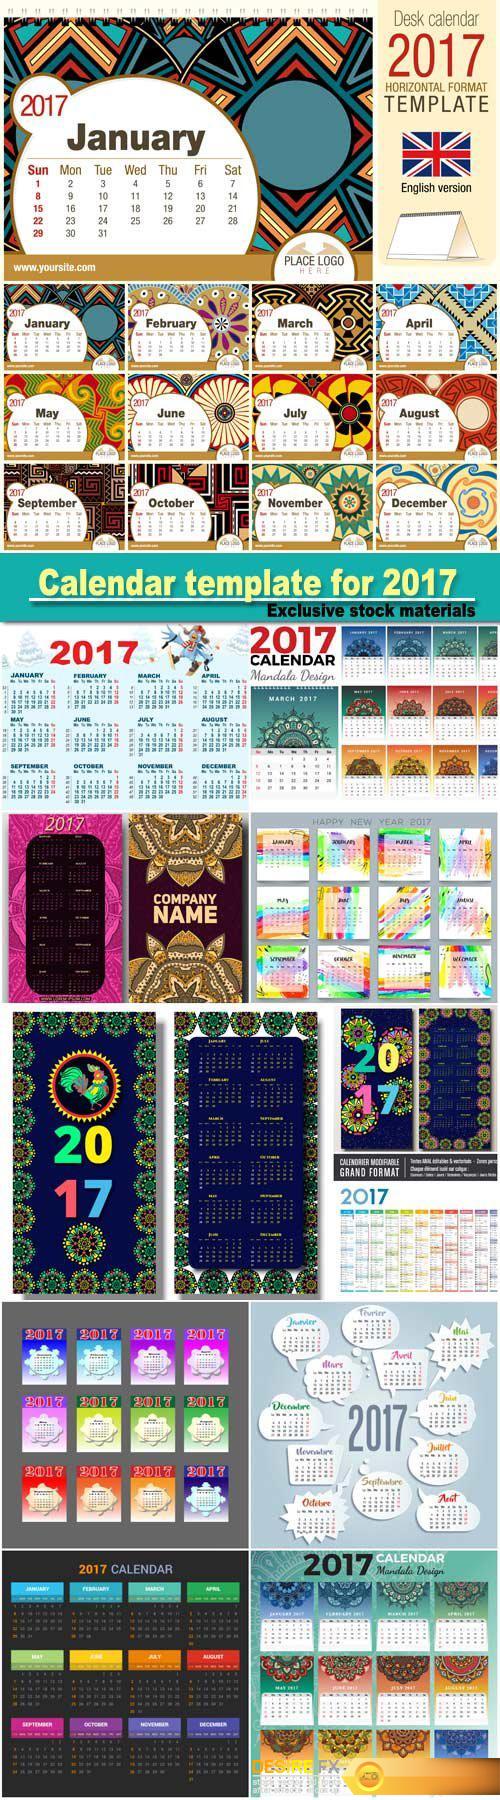 Calendar template for 2017, colorful hand drawn doodles